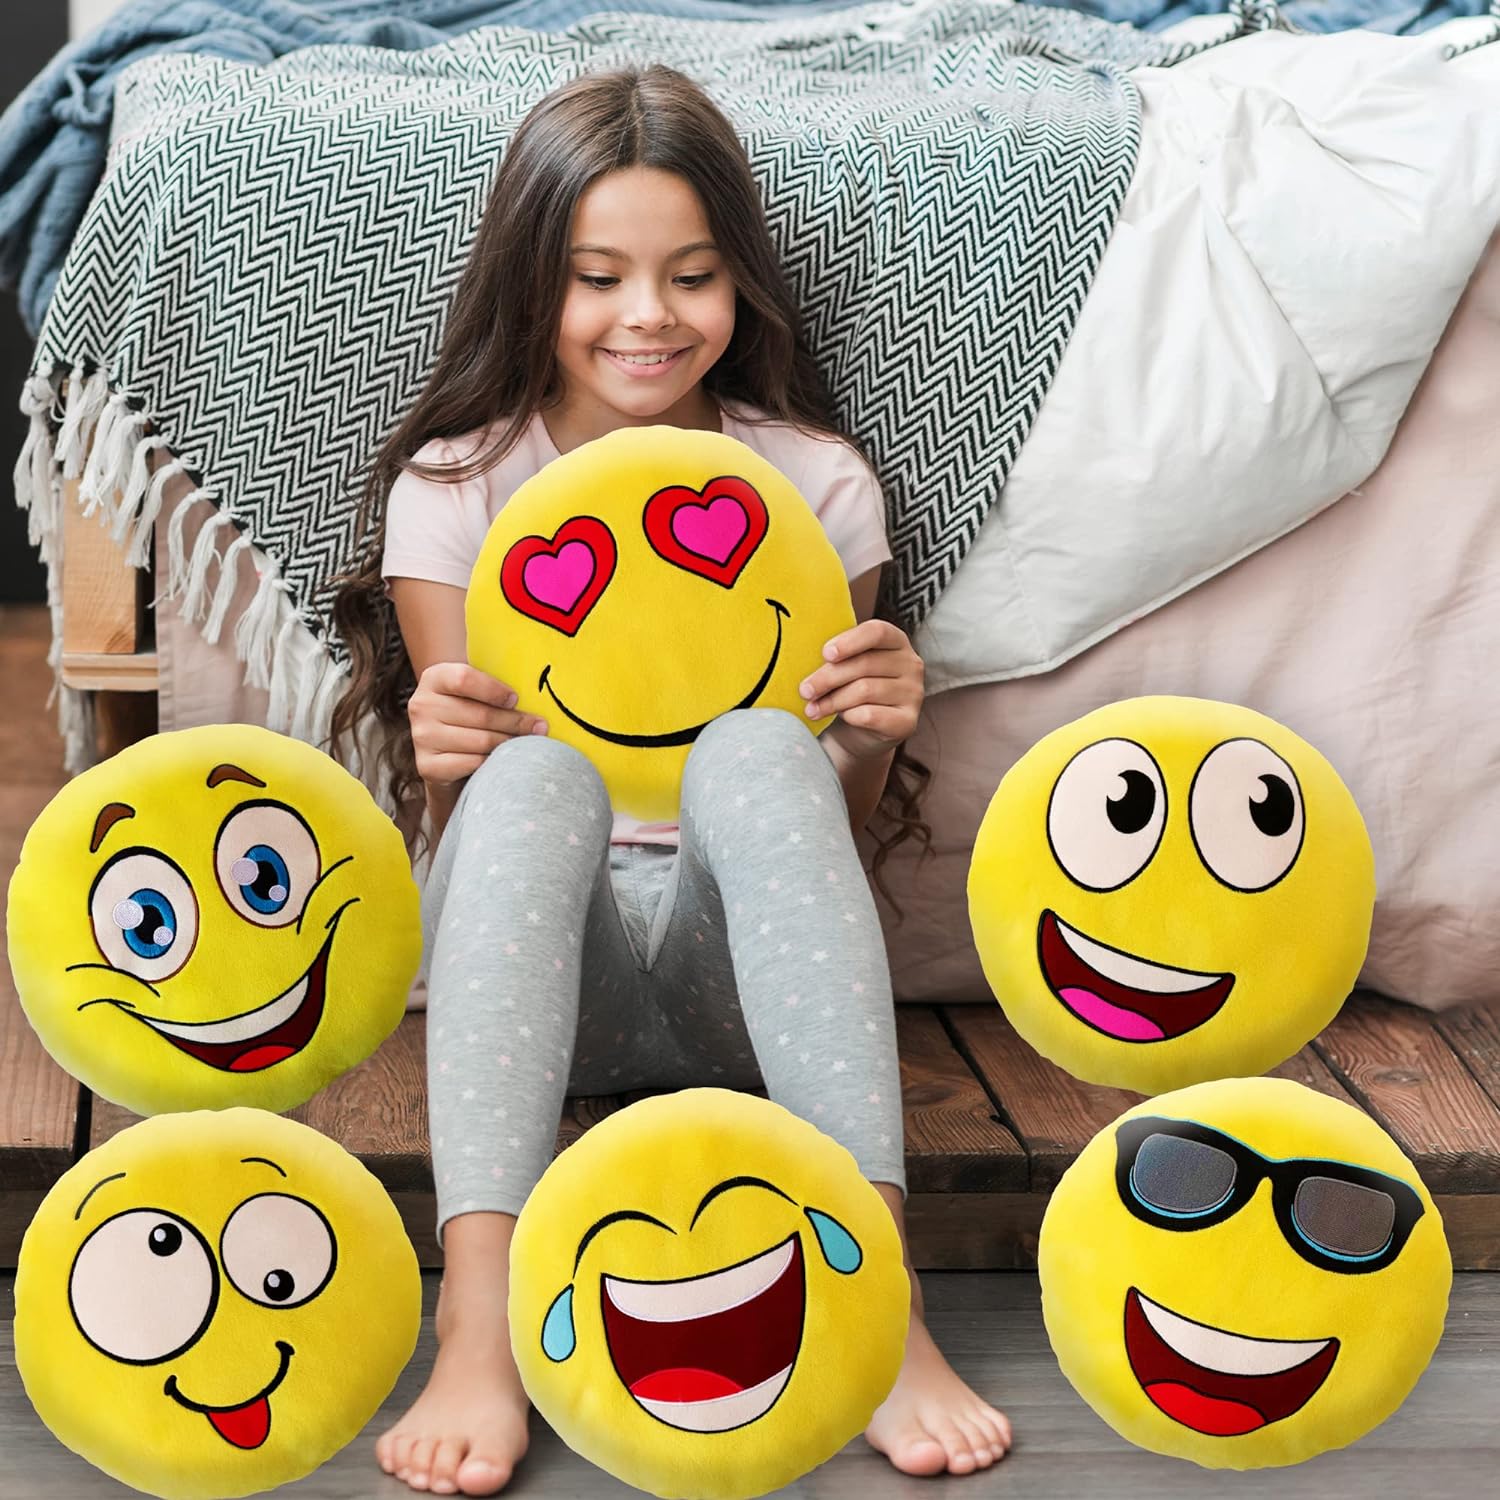 ArtCreativity Assorted Emoticon Pillows, Pack of 6, Yellow Smile Face Cushions, Soft Stuffed Emoticon Decorations, Cute Living Room Bedroom Décor, Emoticon Birthday Party Favors for Kids